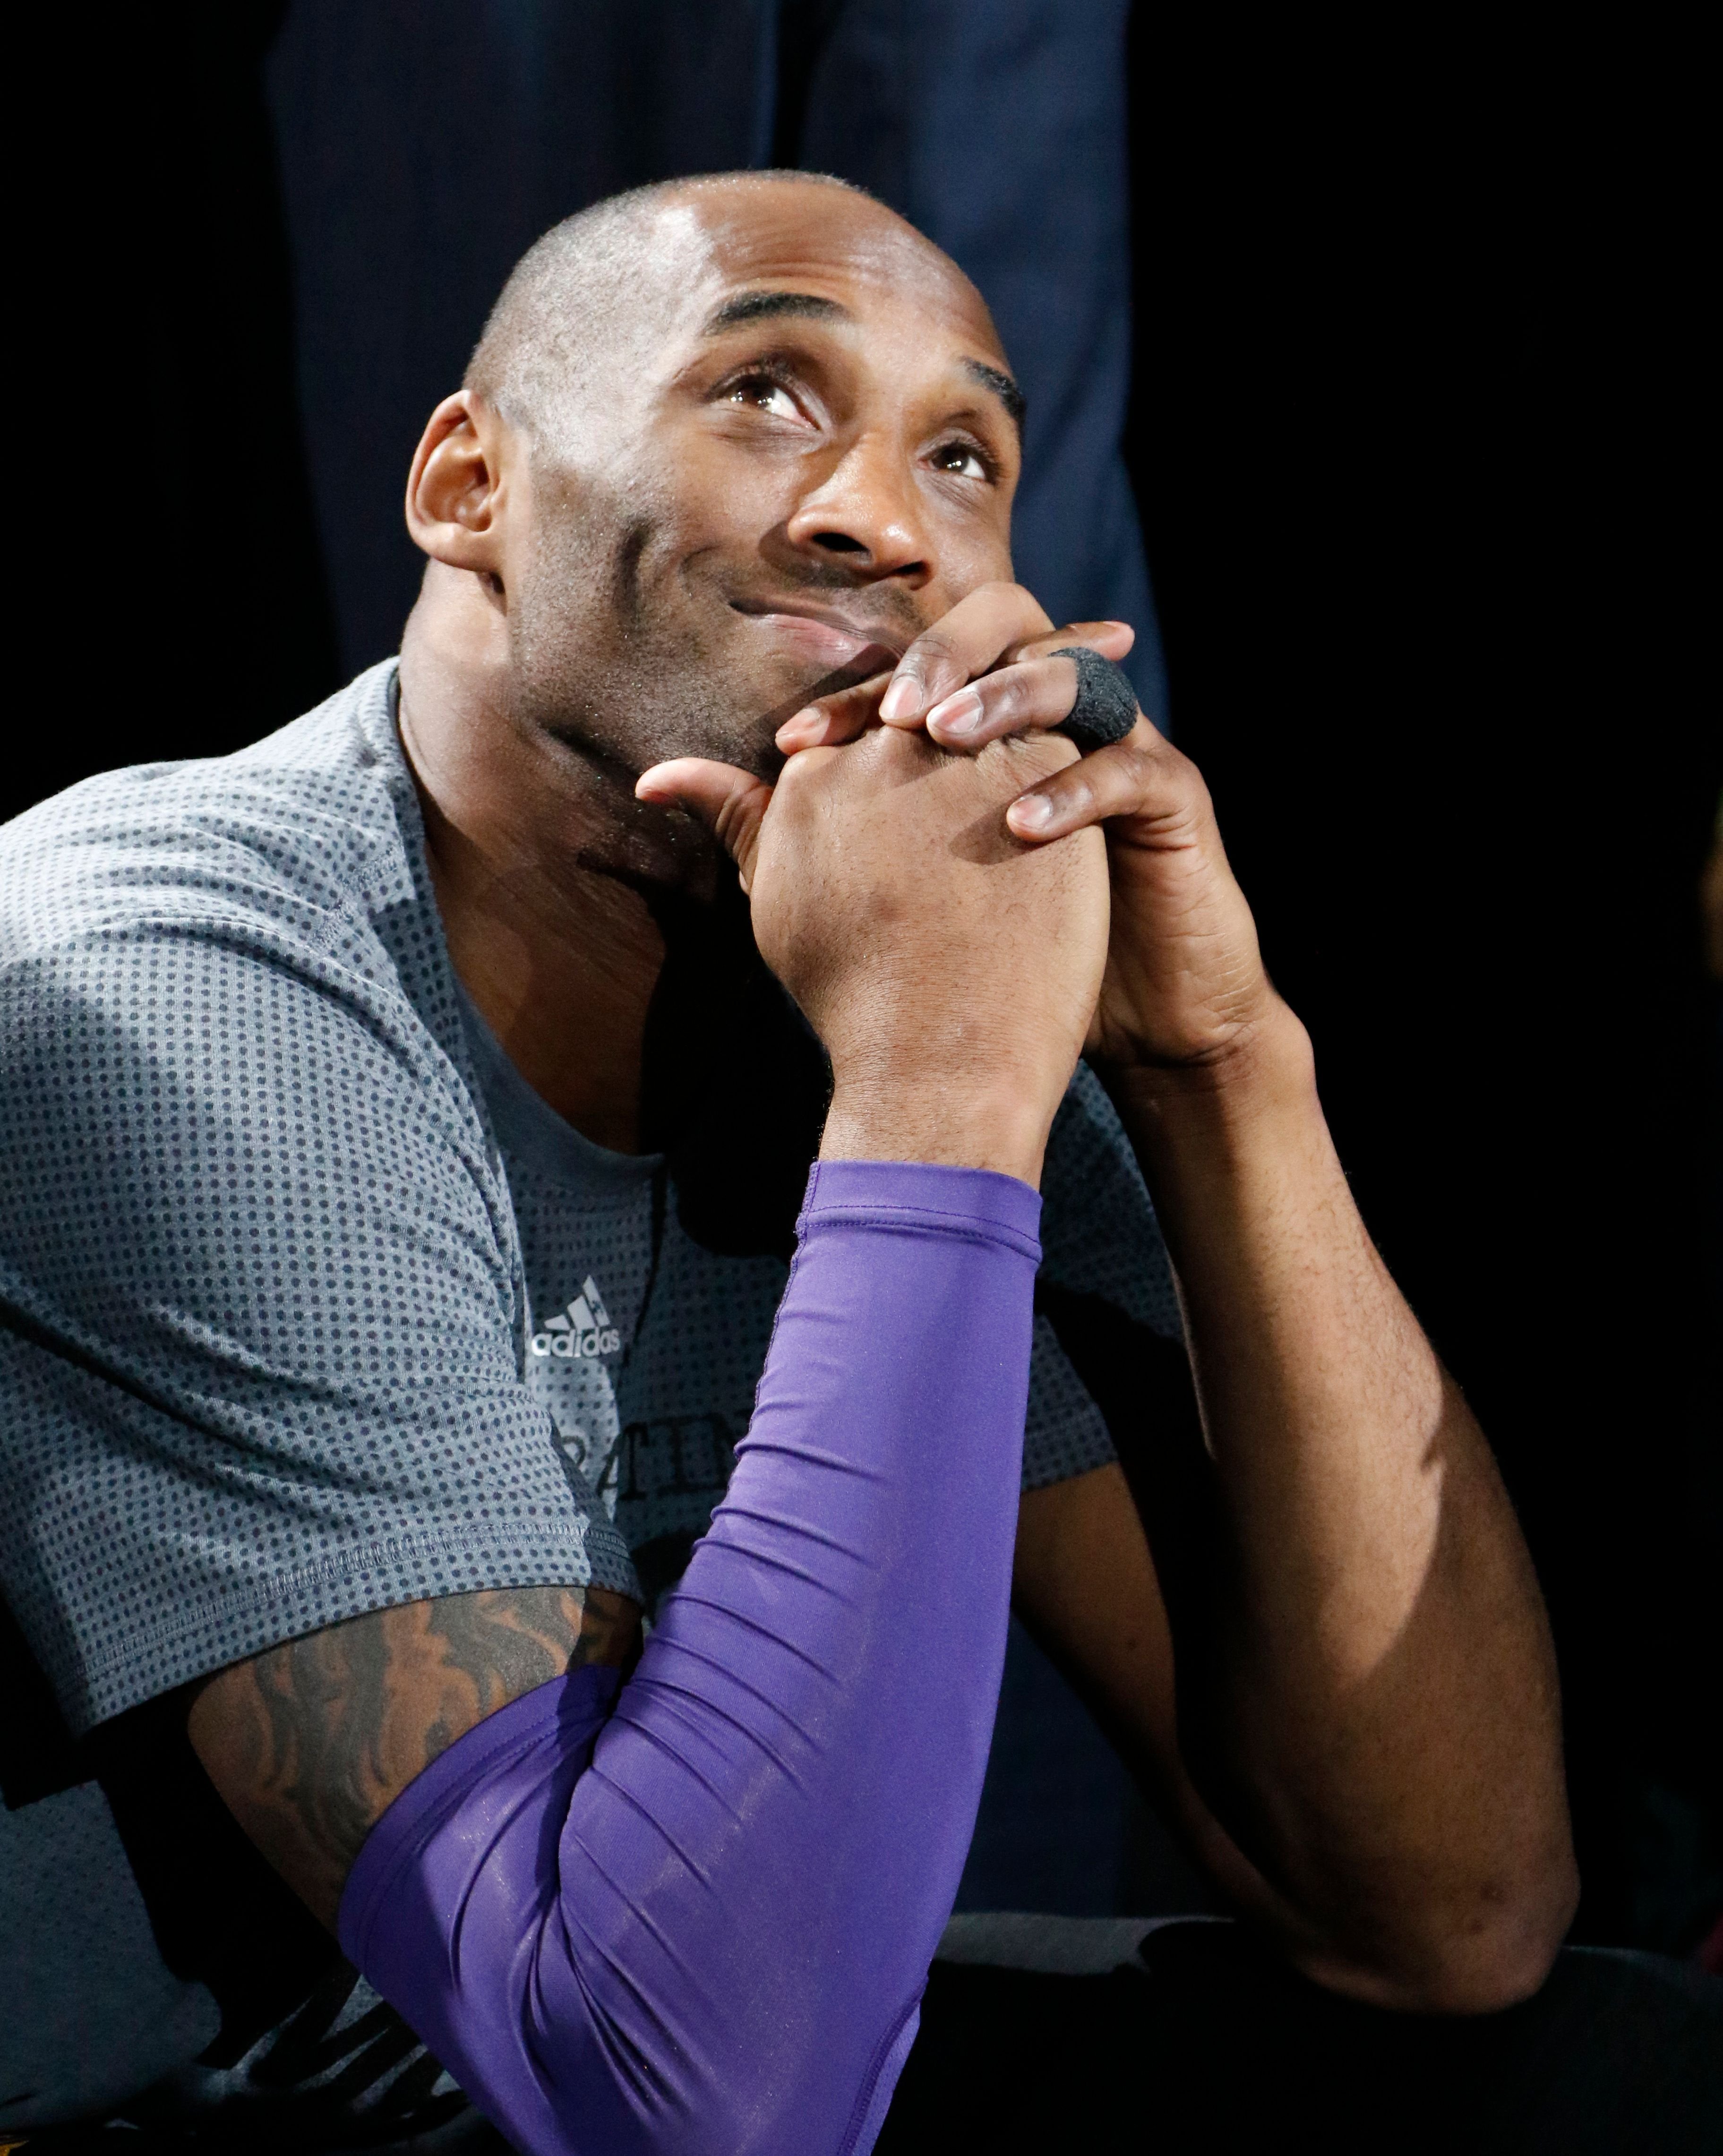 Late Kobe Bryant of the Los Angeles Lakers at AT&T Center on February 6, 2016 in San Antonio, Texas. | Photo: Getty Images